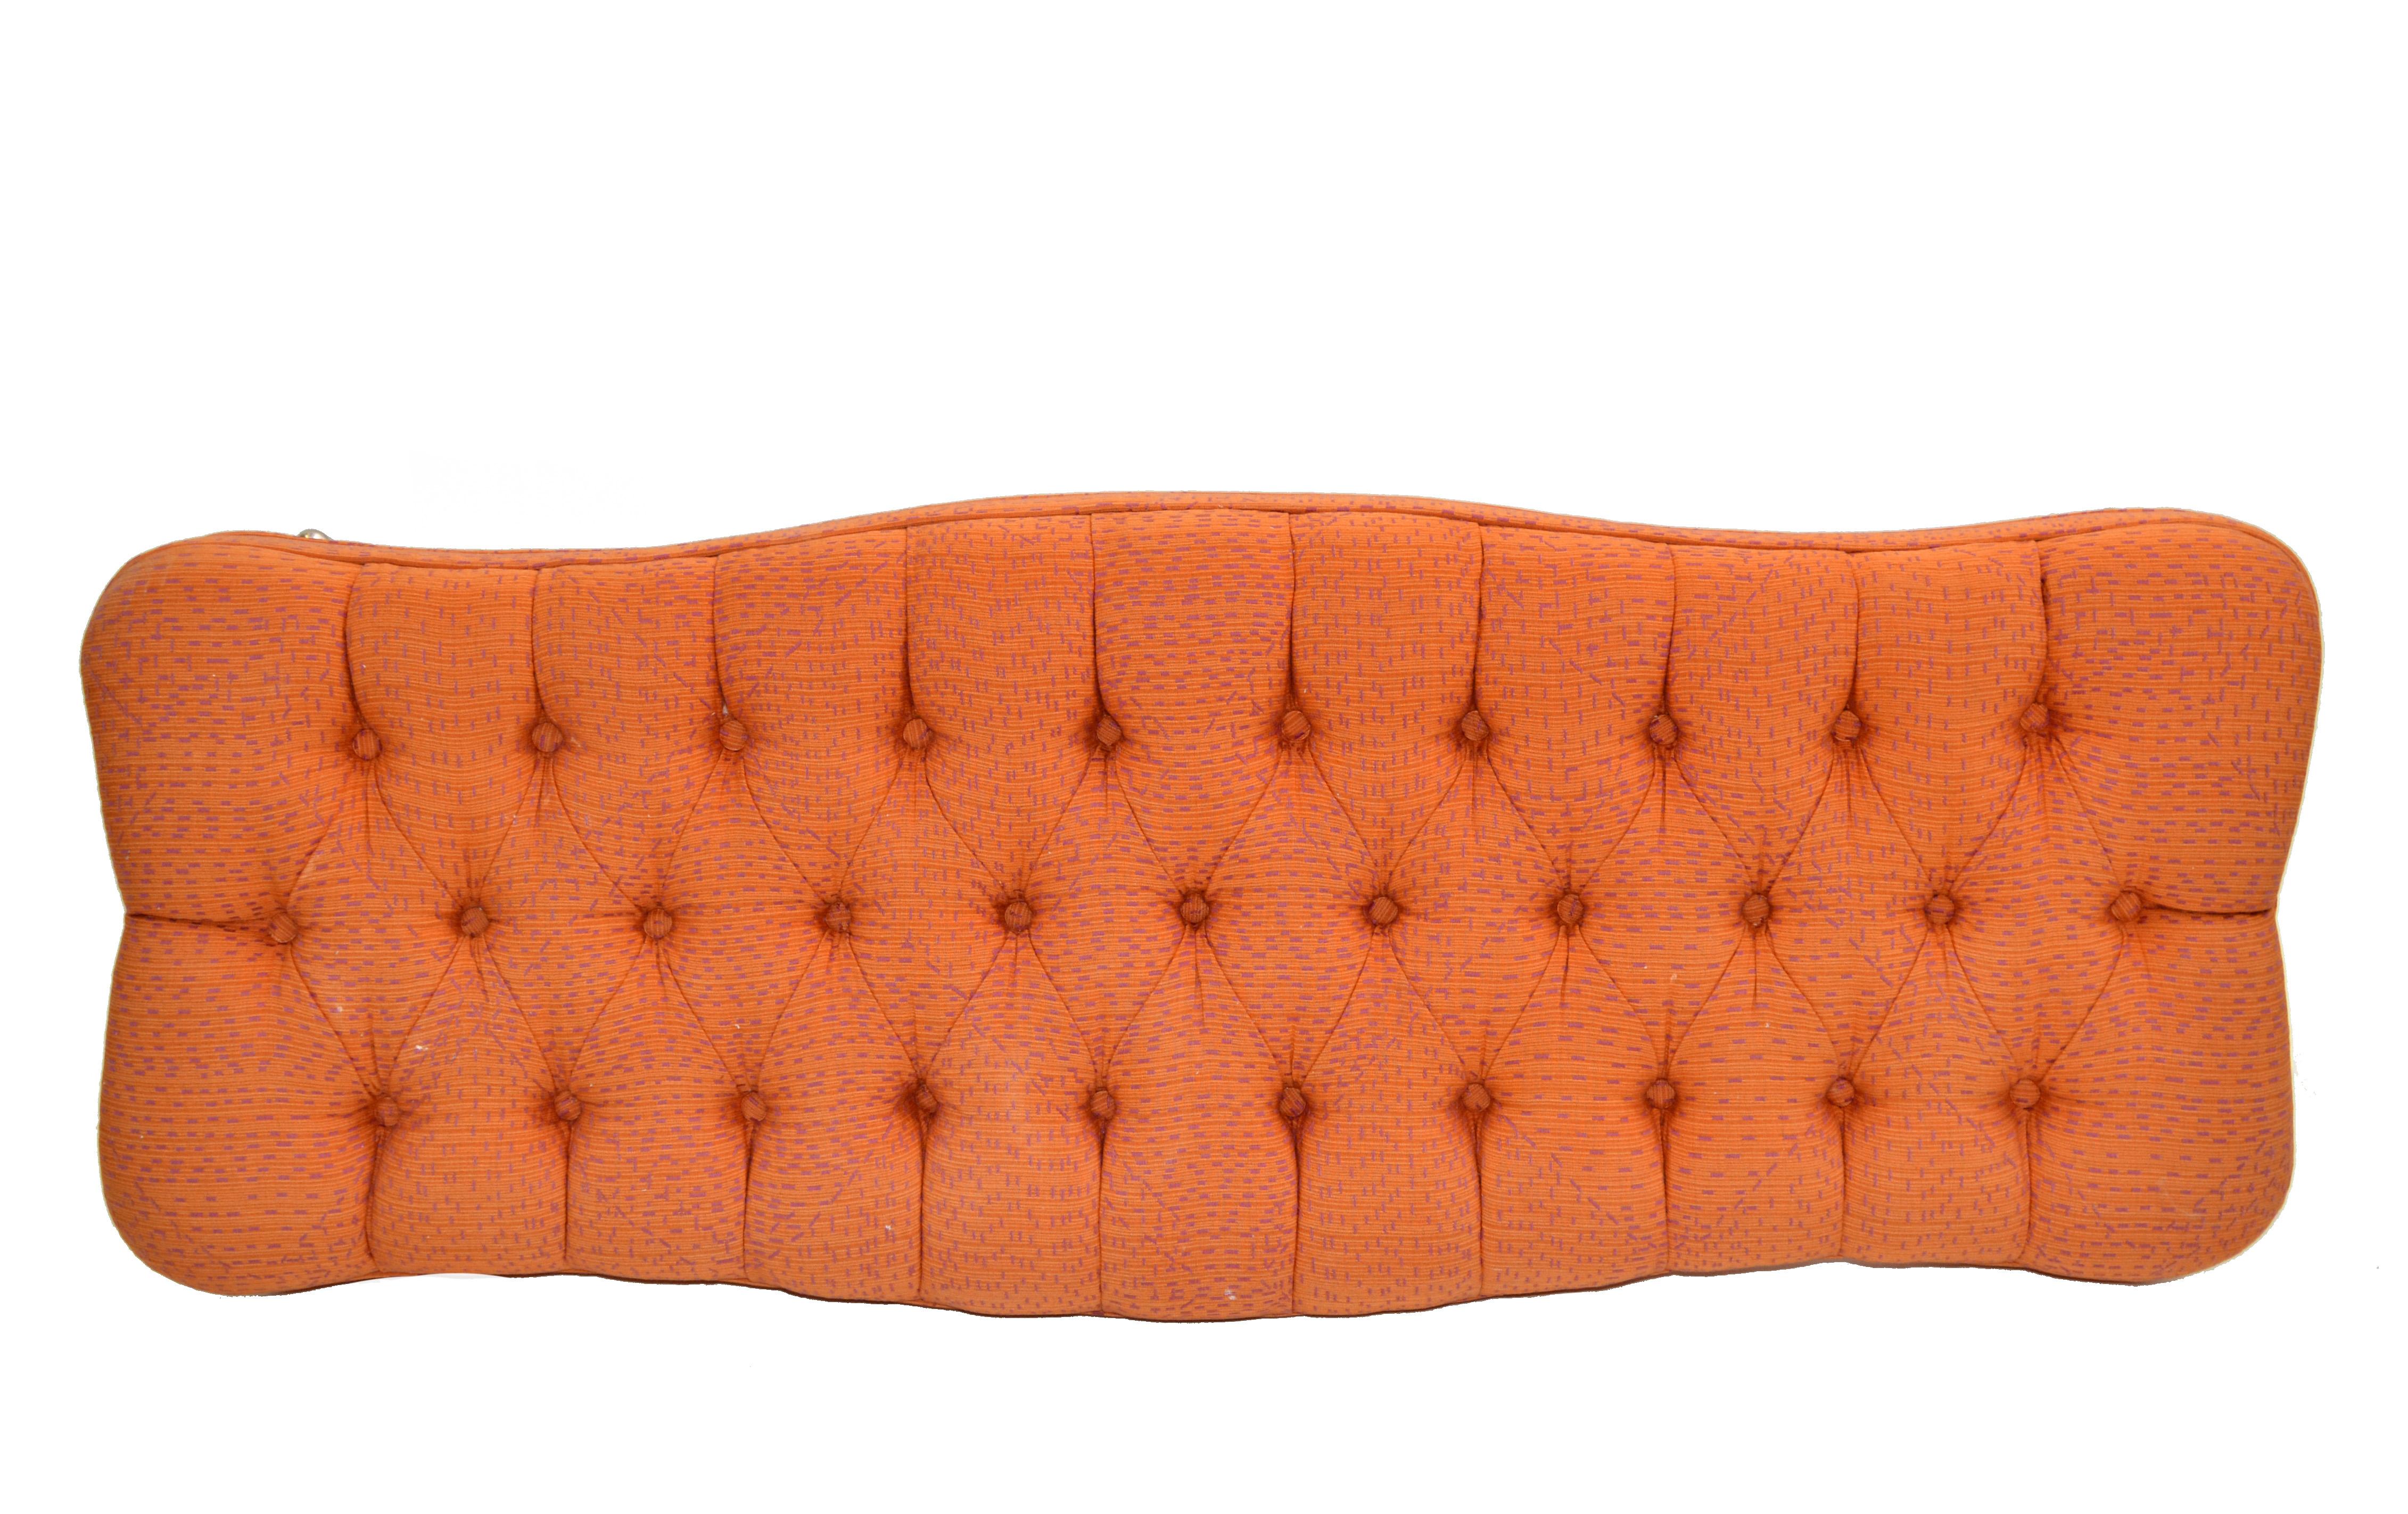 Mastercraft Italian Hollywood Regency Tufted Orange Bench Stainless Steel Legs In Good Condition For Sale In Miami, FL